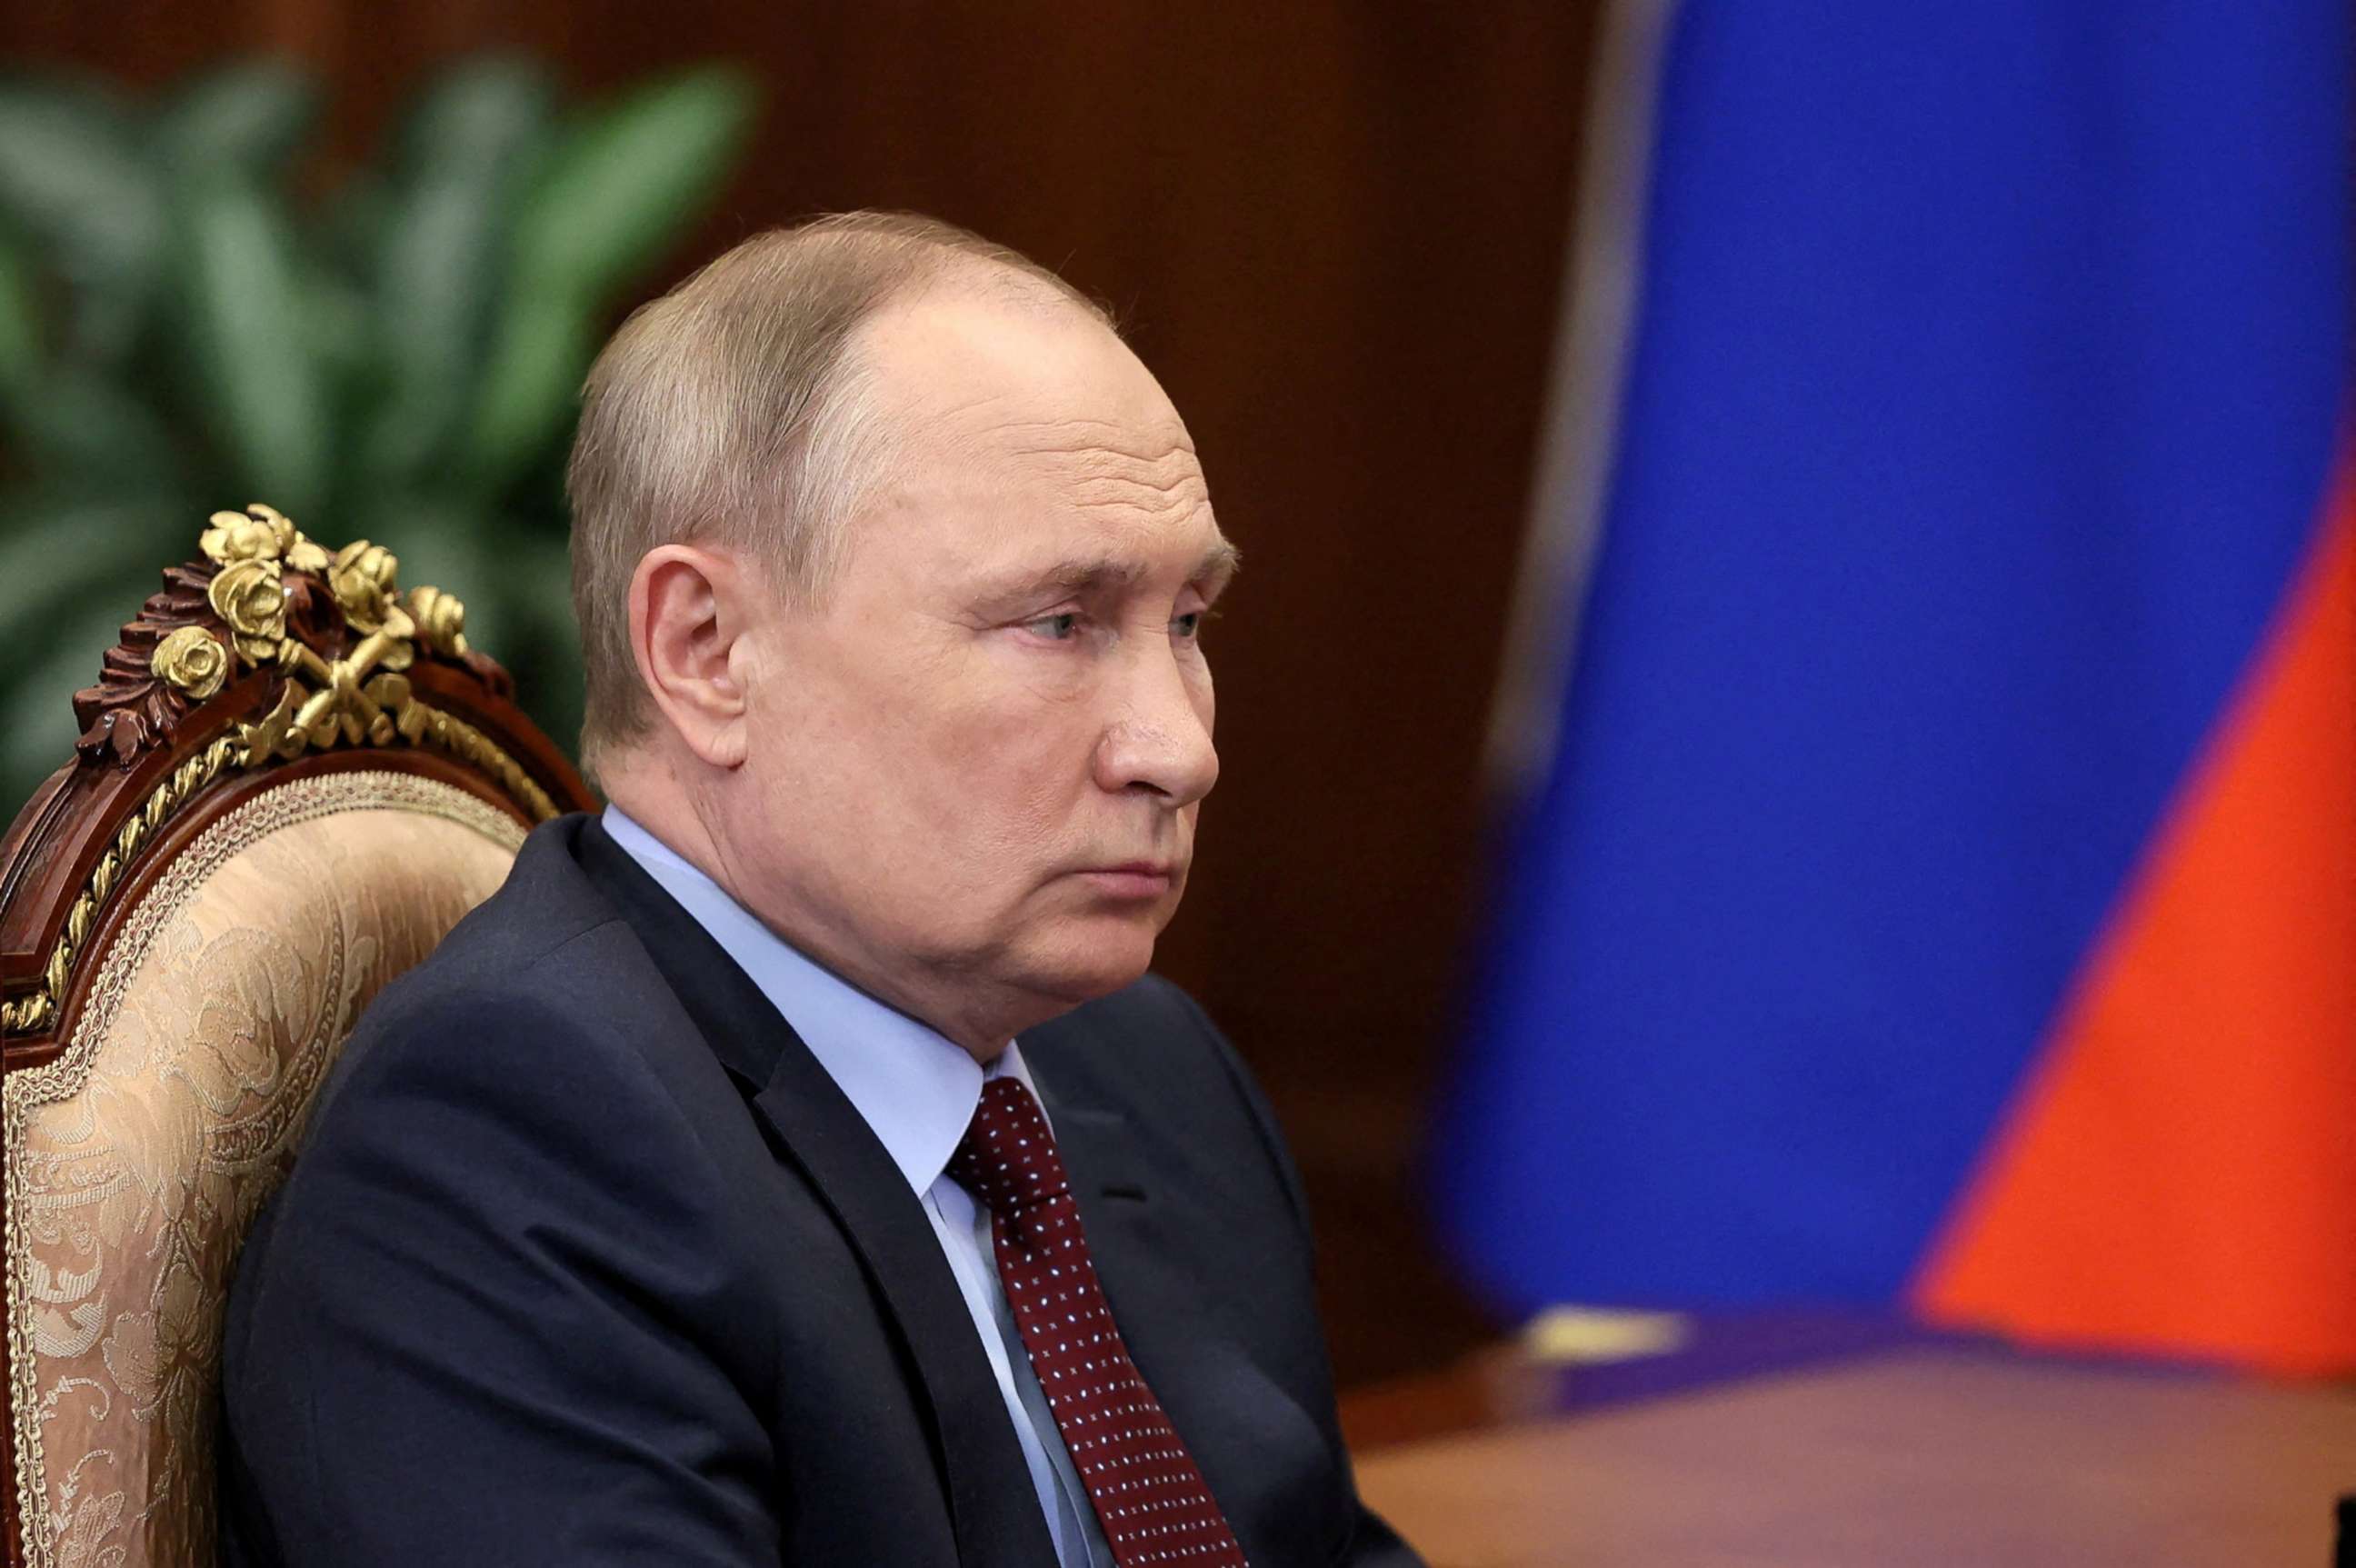 PHOTO: Russian President Vladimir Putin attends a meeting in Moscow, Russia, March 2, 2022.